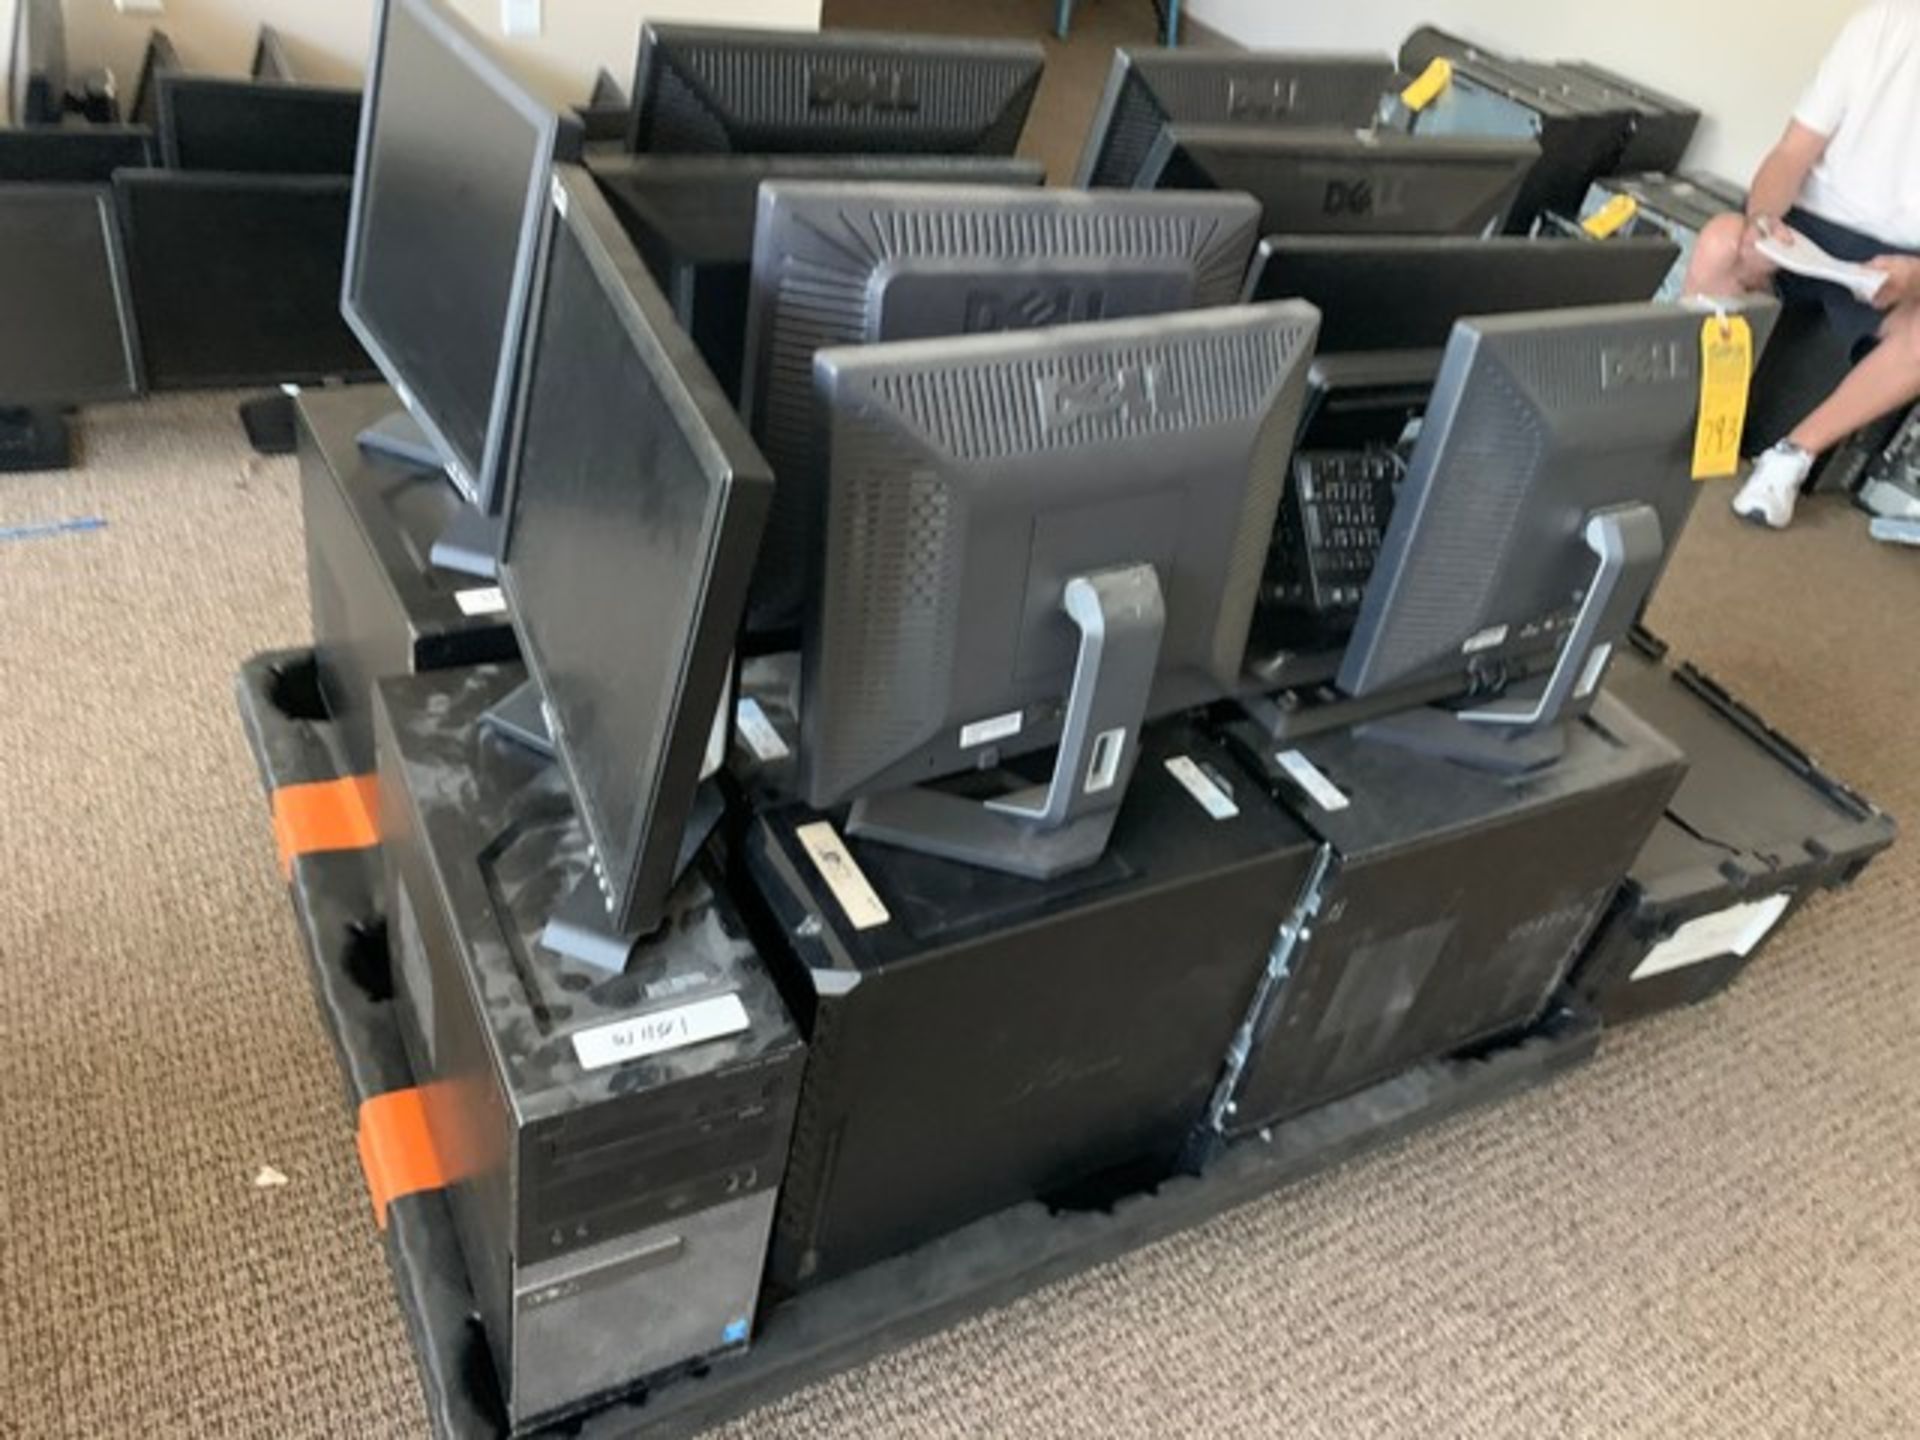 ASSORTED COMPUTERS WITH MONITORS & KEYBOARDS - DELL, HP, ETC